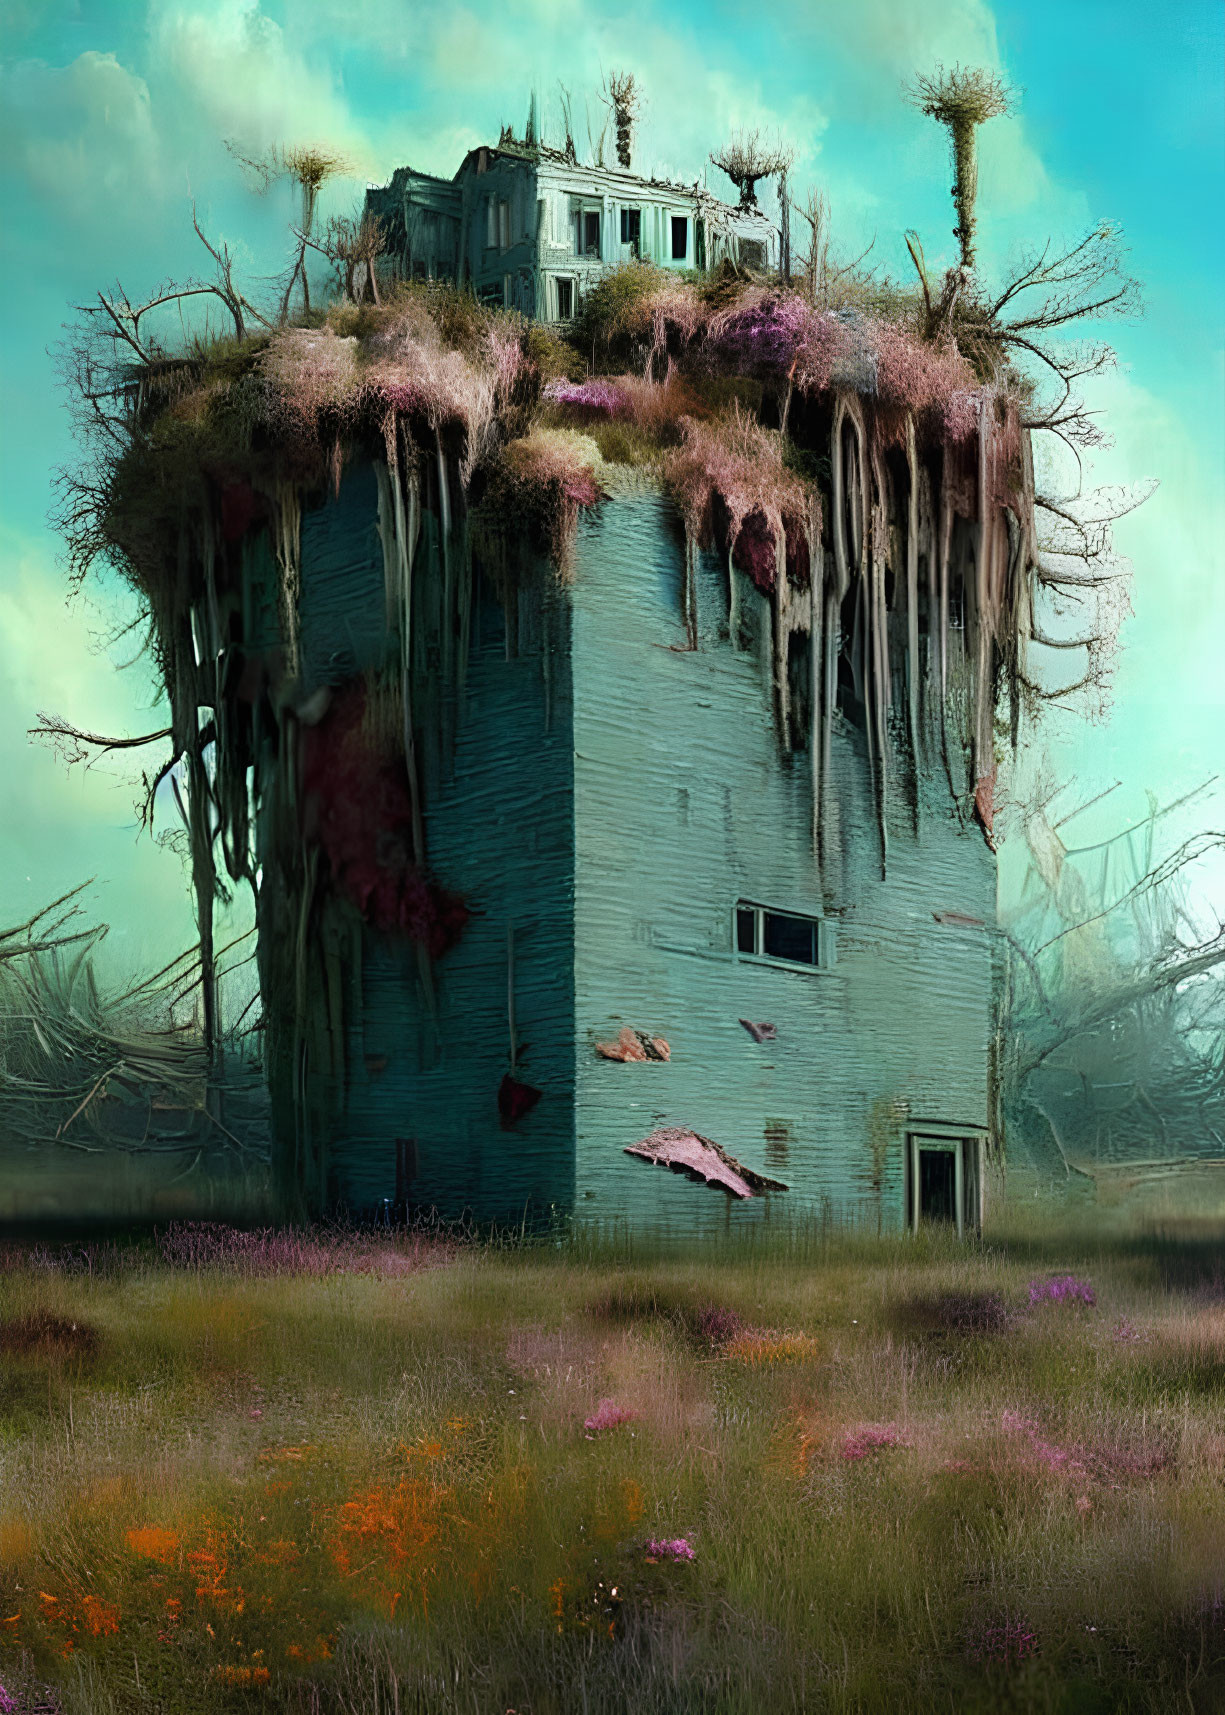 Surreal cylindrical building with dilapidated house and overgrown vegetation in misty landscape